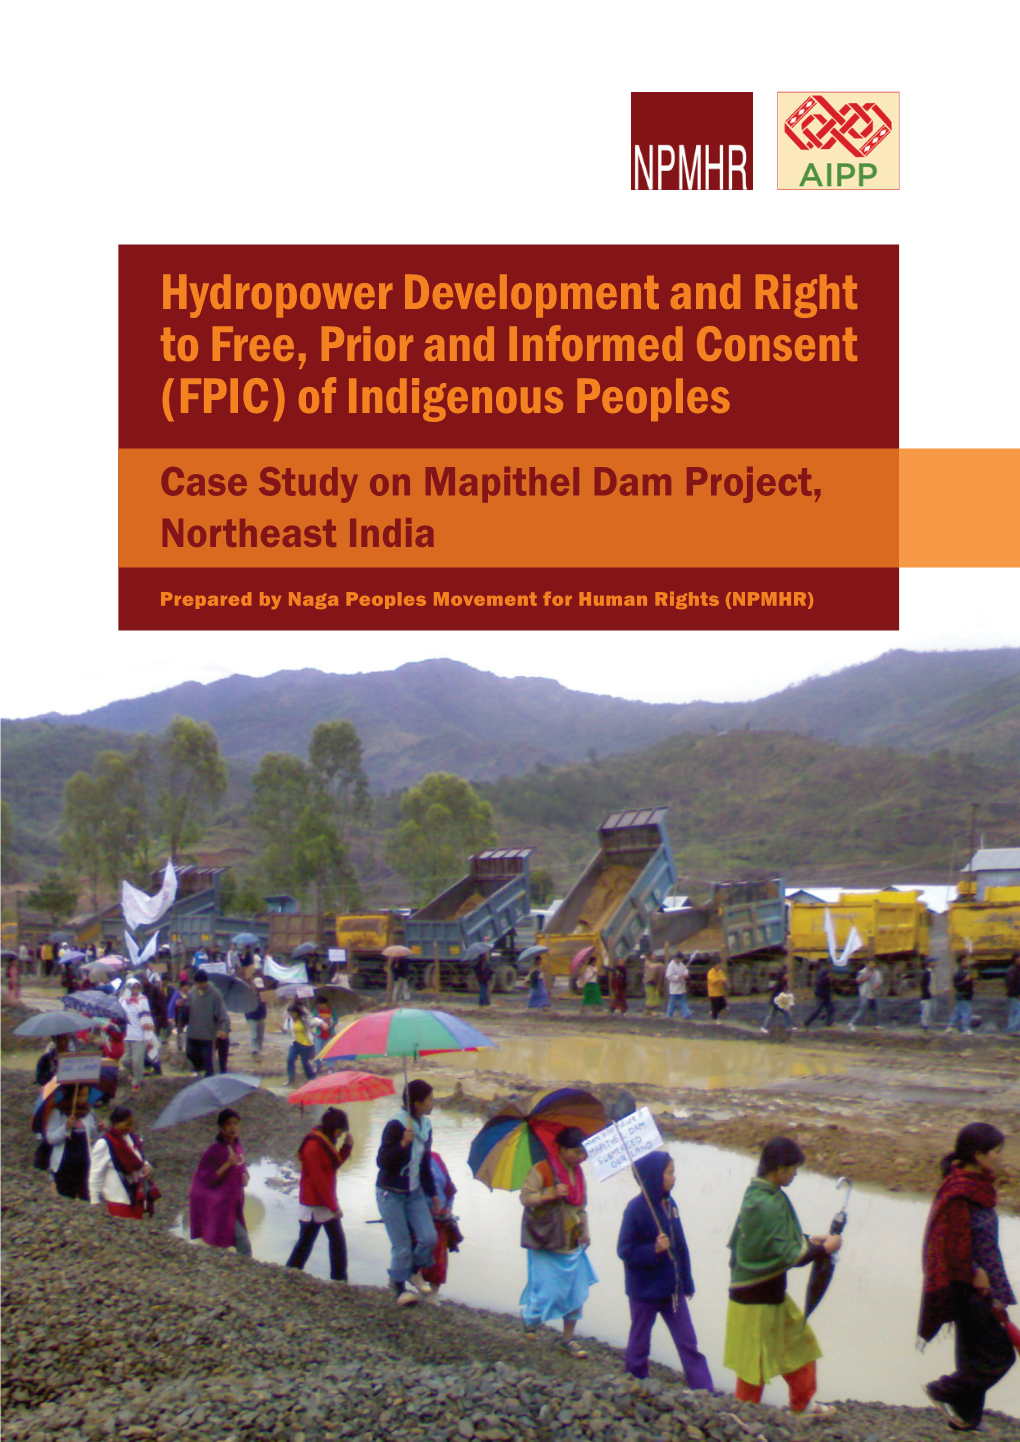 Hydropower Development and Right to Free, Prior and Informed Consent (FPIC) of Indigenous Peoples Case Study on Mapithel Dam Project, Northeast India